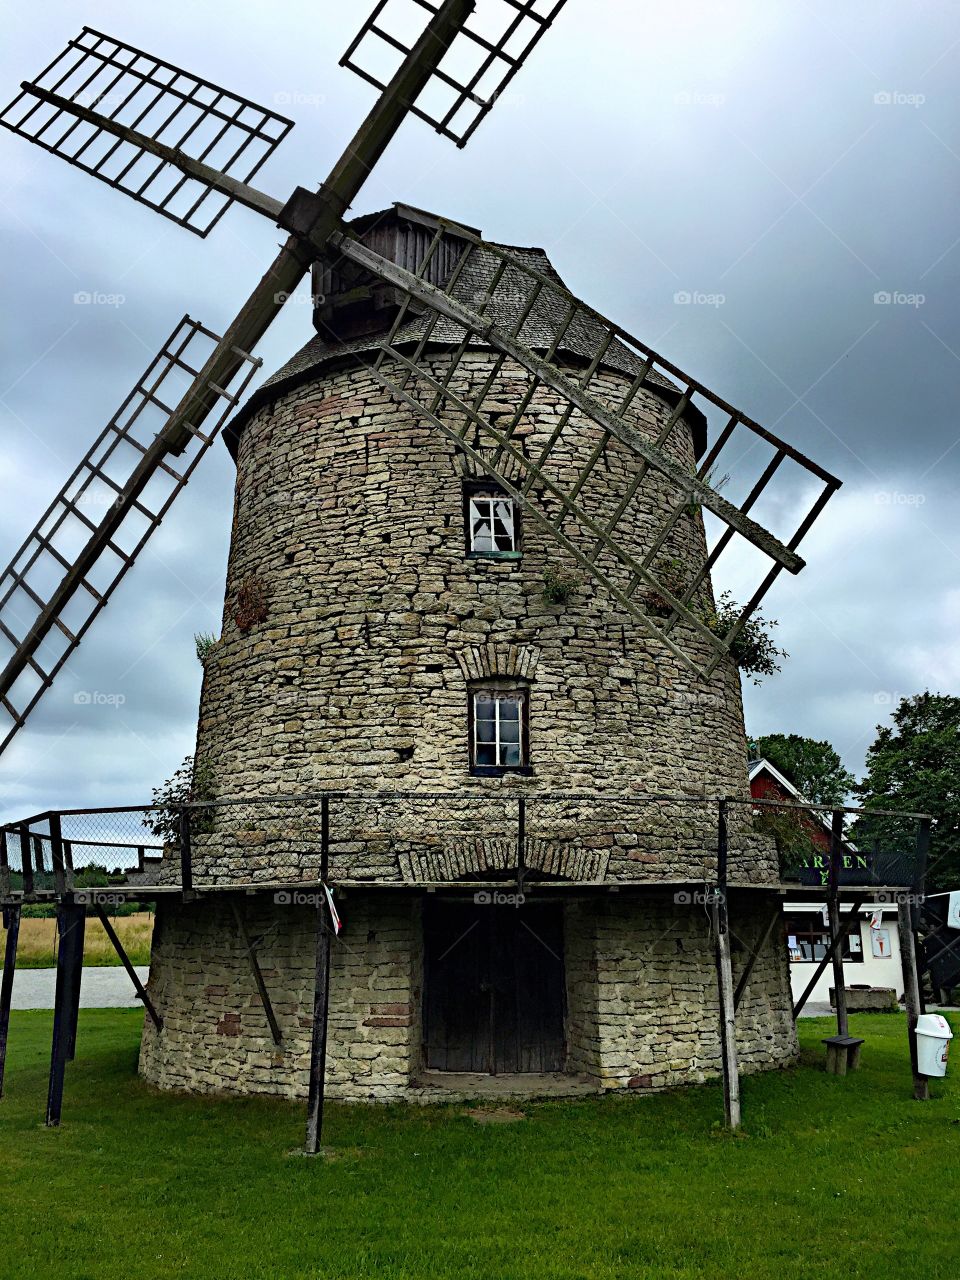 View of windmill against cloudy sky